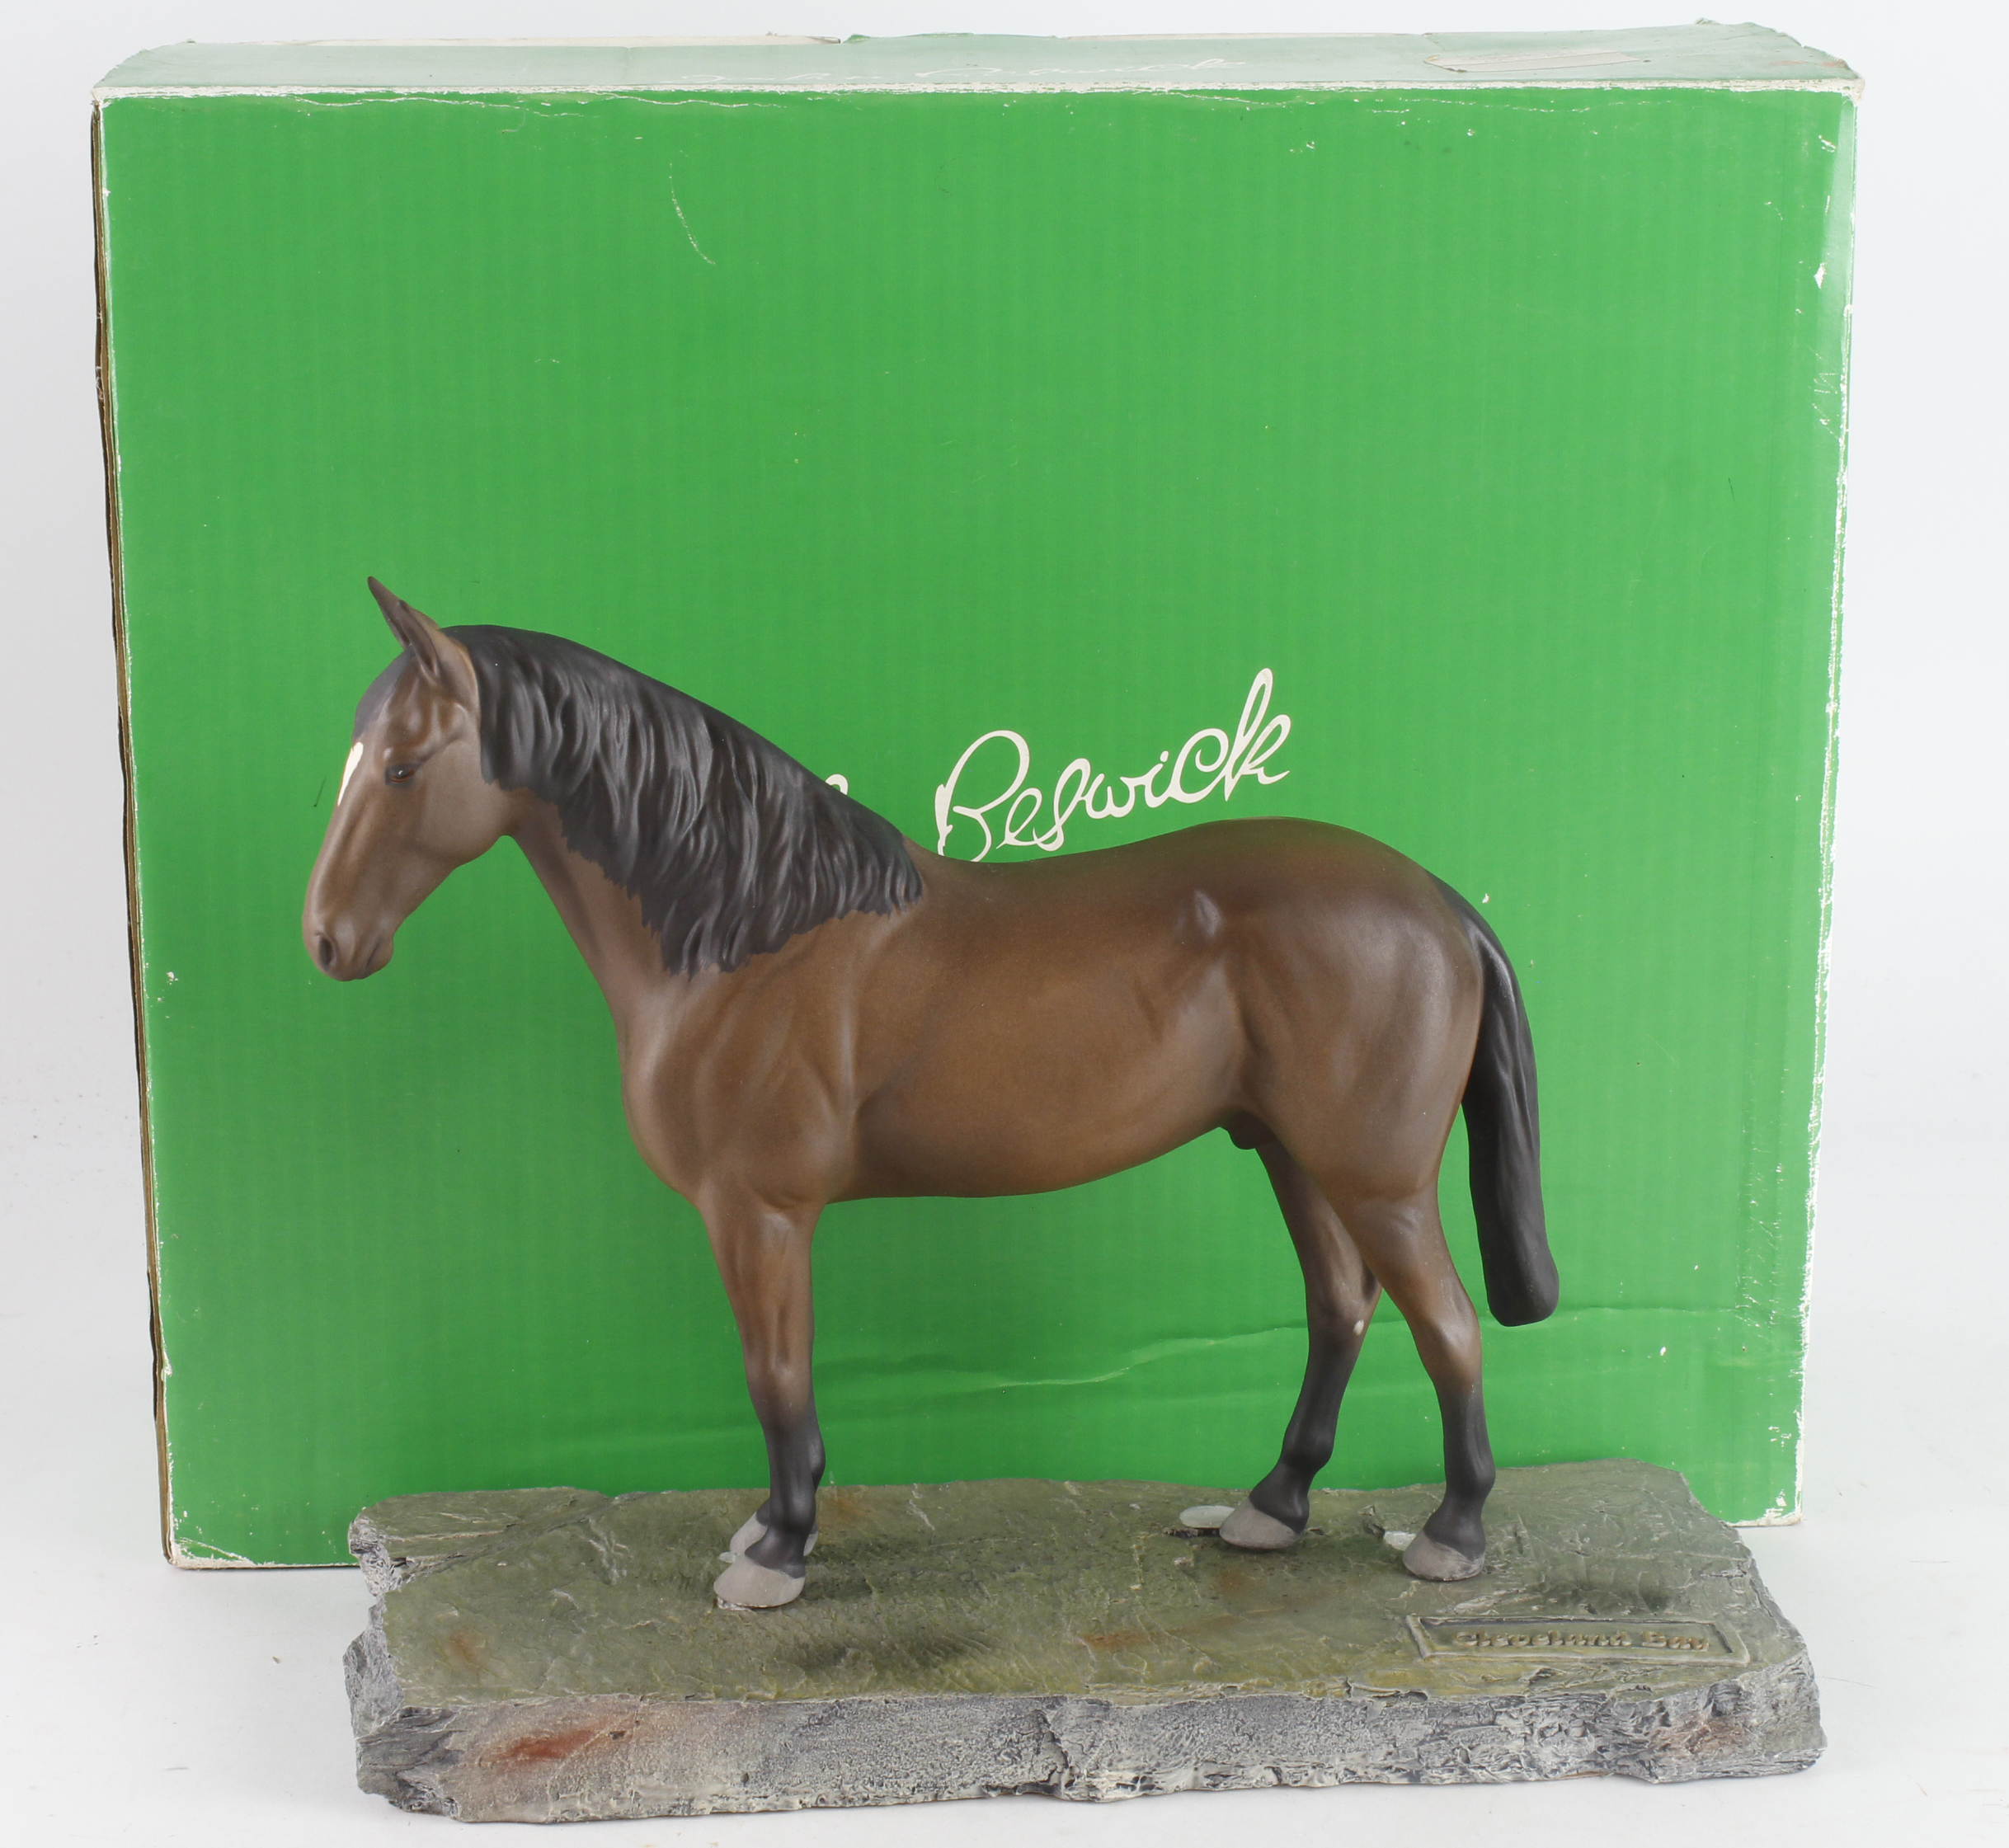 Beswick Connoisseur racehorse figure 'Cleveland Bay' (A3999), on plinth height 22cm, contained in